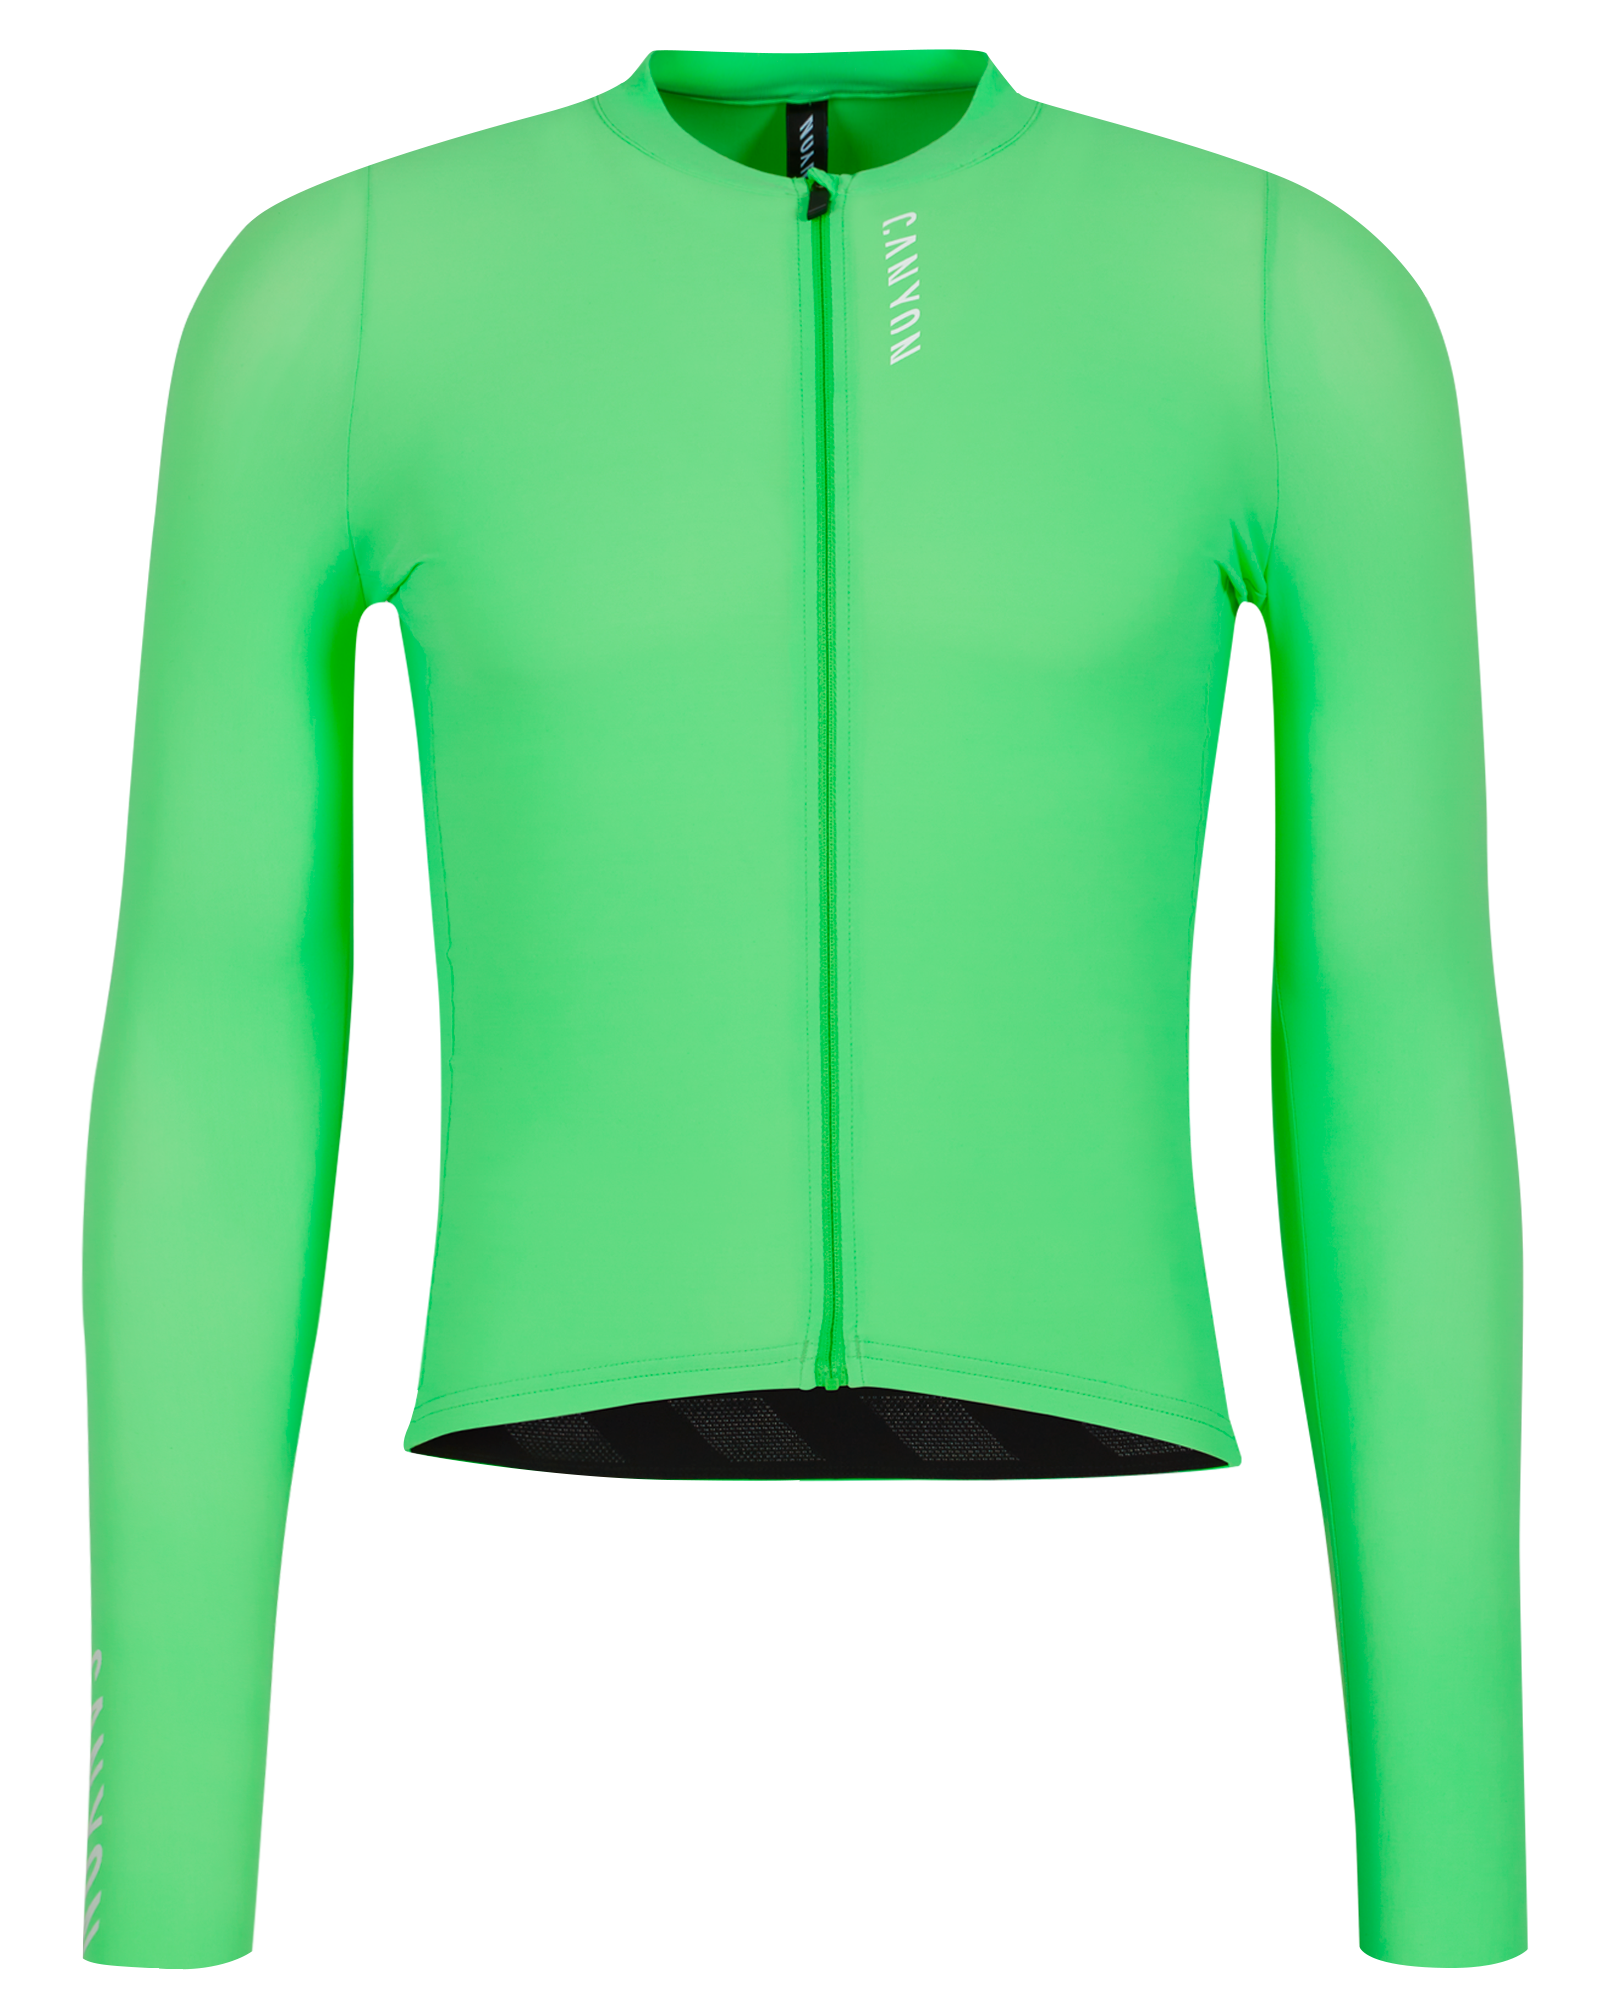 How to choose your perfect cycling jersey